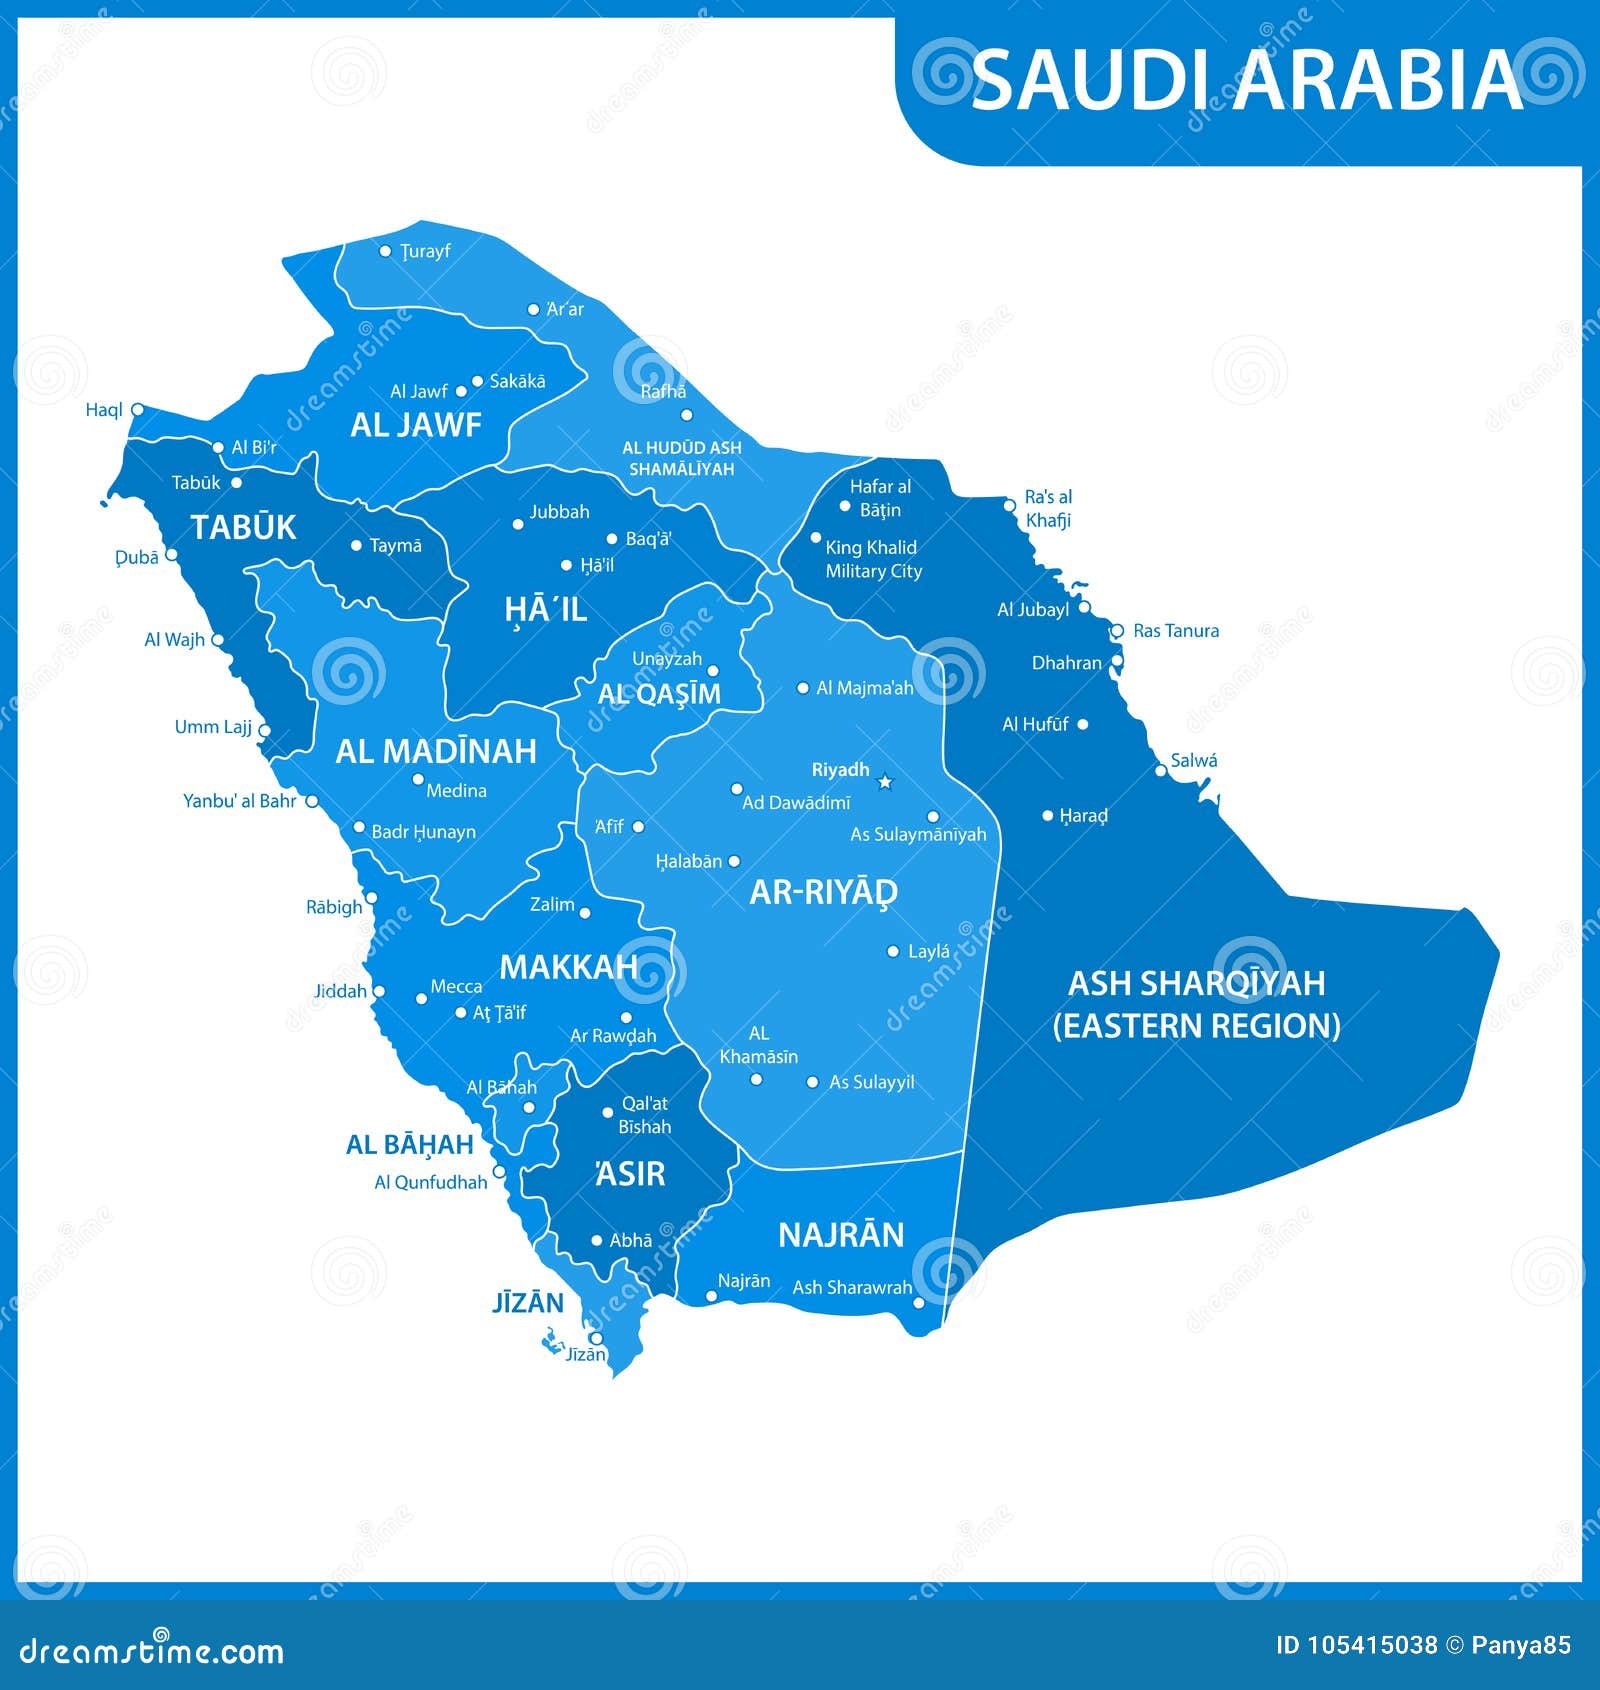 the detailed map of the saudi arabia with regions or states and cities, capitals